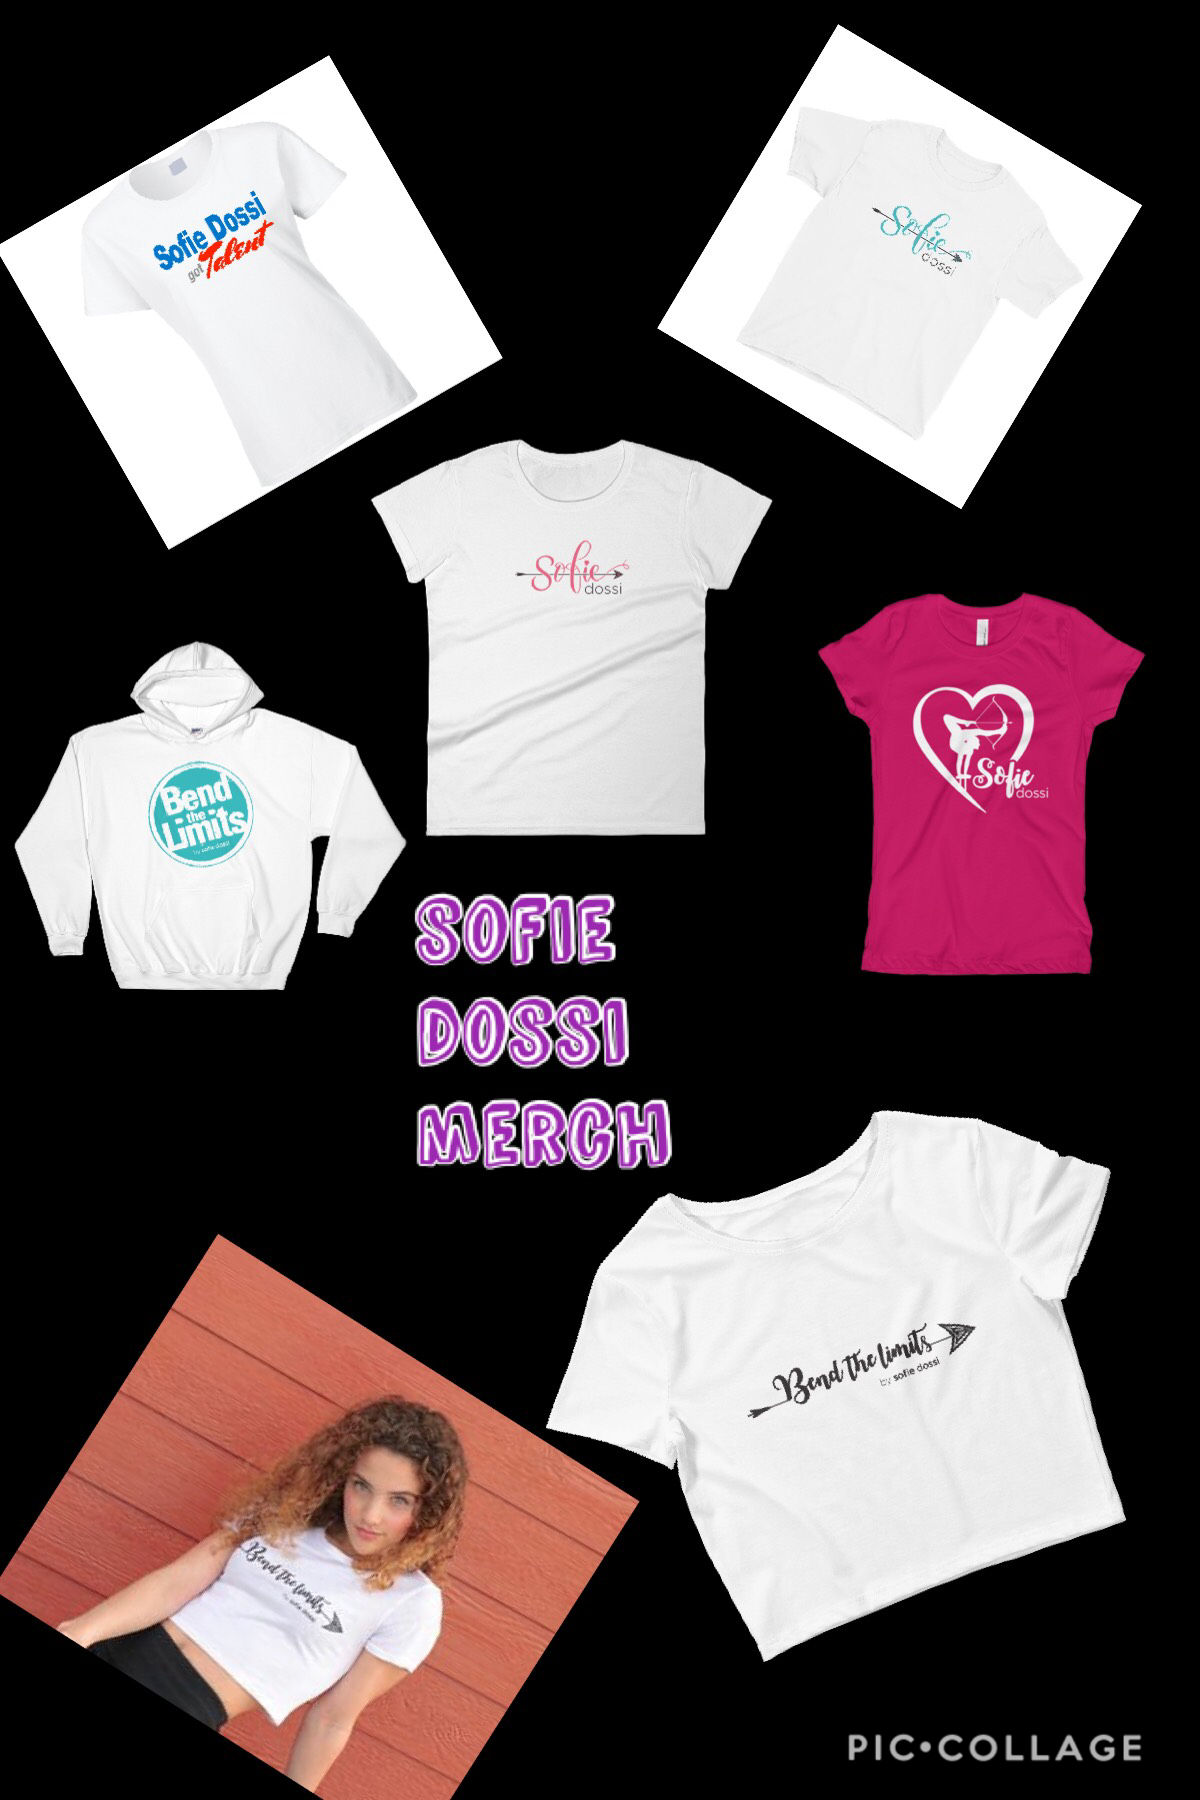 (tap)
my merch!
and my new merch!